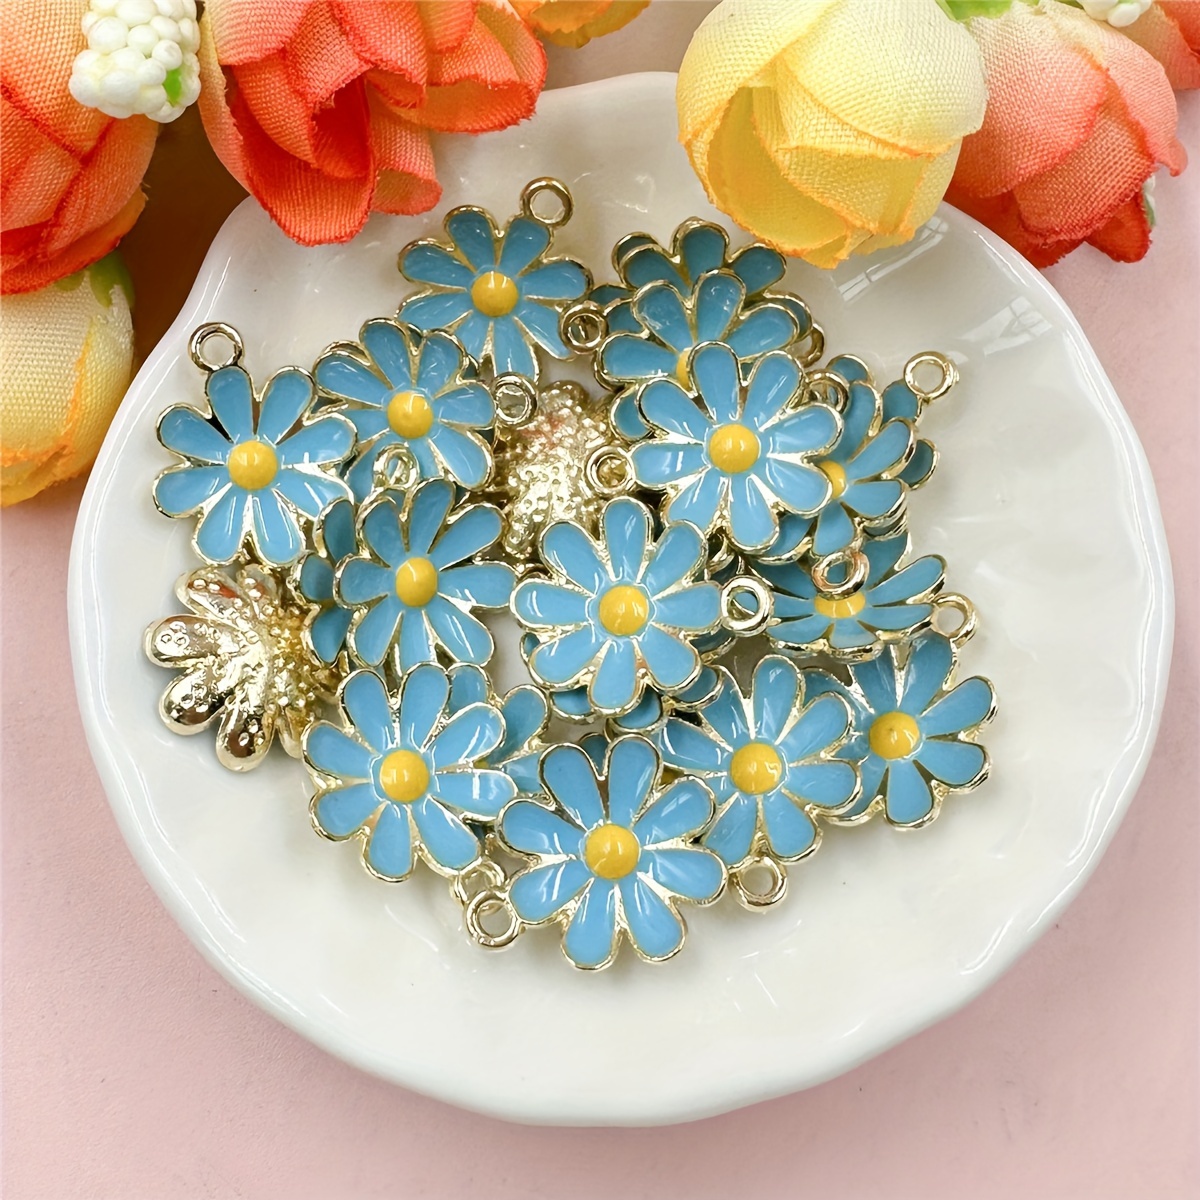  200pcs Daisy Flower Clay Beads-Polymer Clay Beads Charms for  Bracelet Necklace Jewelry Making (Flower)